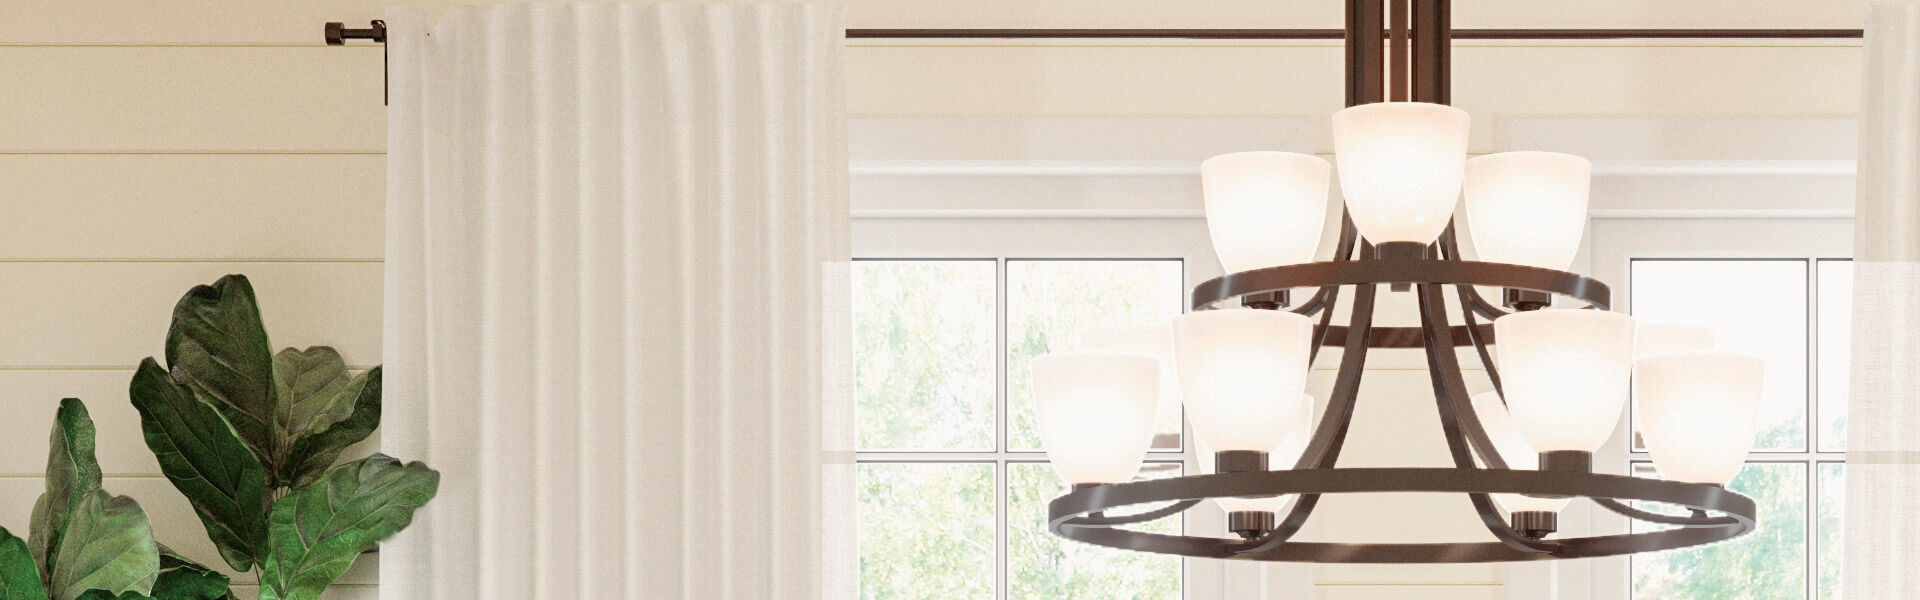 HomePlace by Capital Lighting | 20% Off Entire Line | ends 7.5